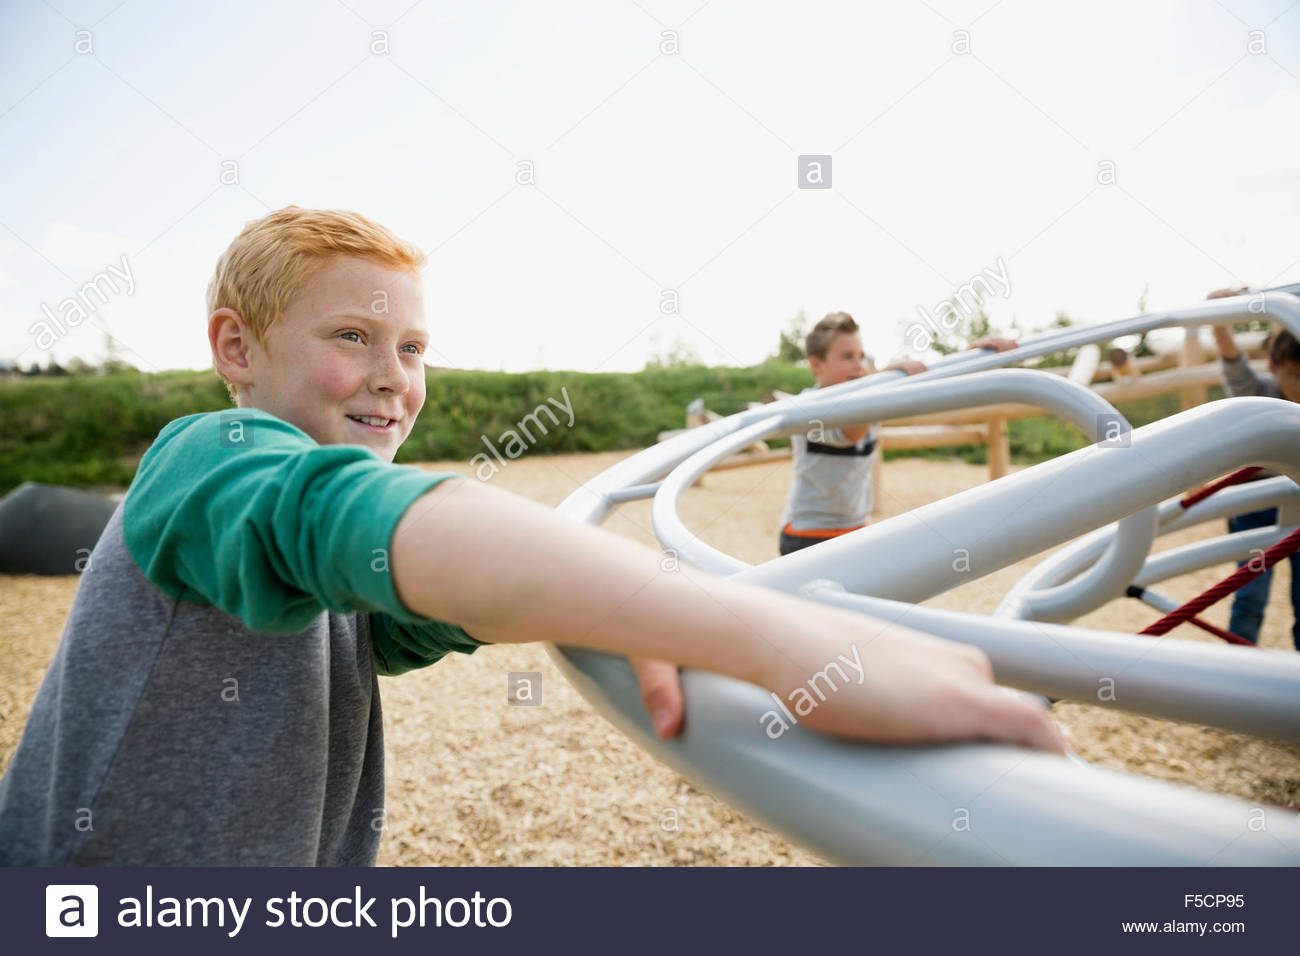 Boy playing with friends at playground Stock Photo